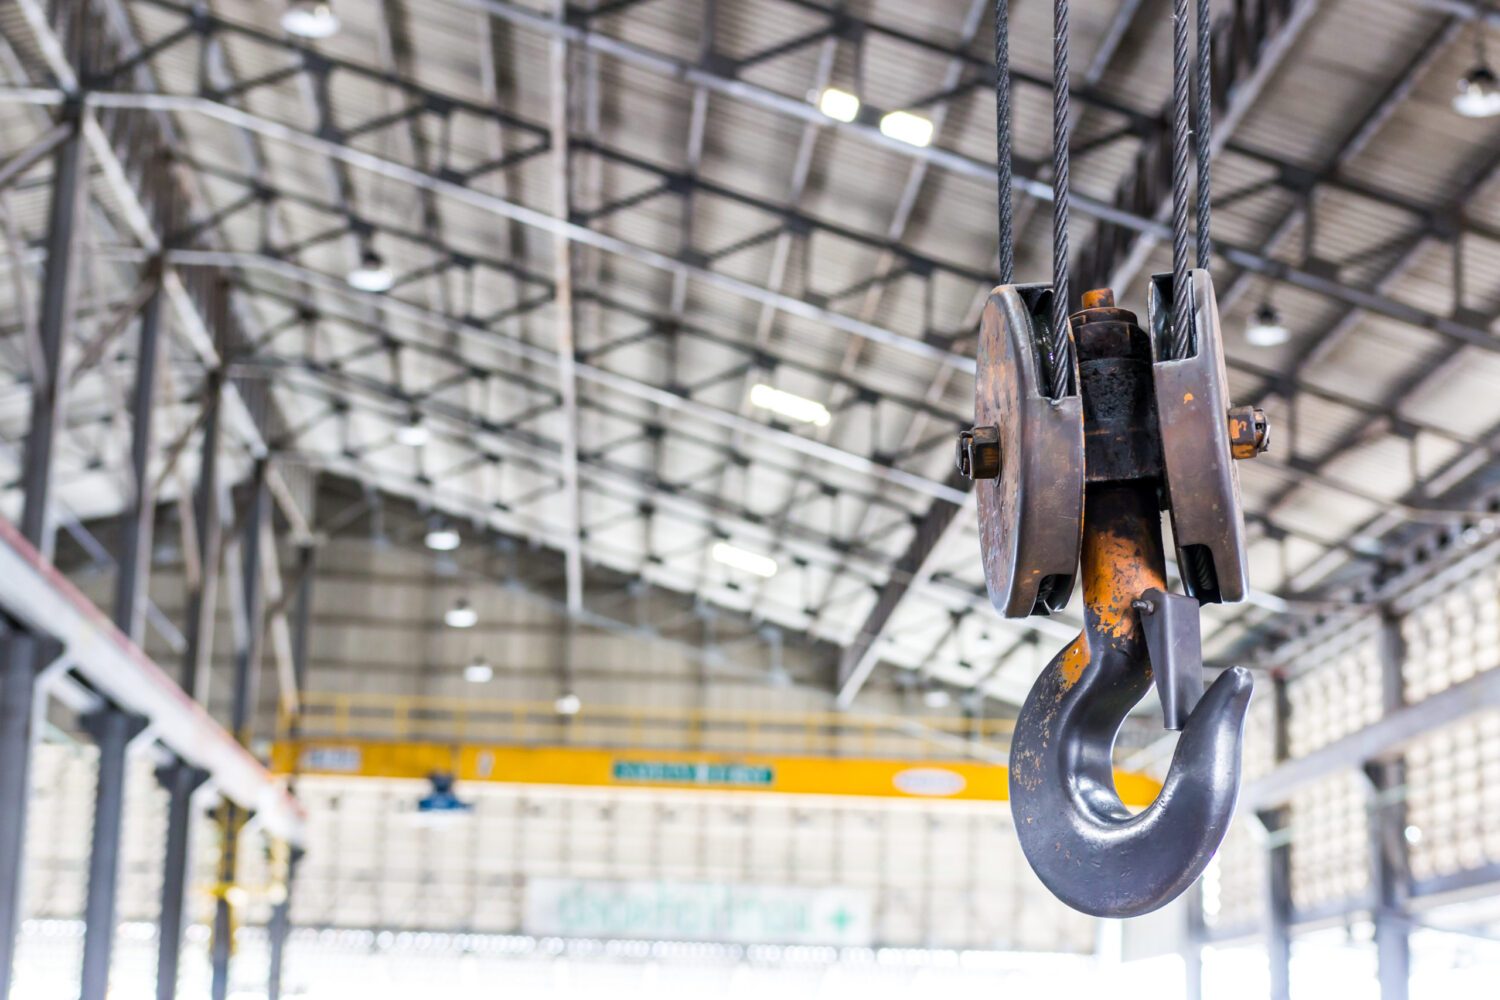 6 Signs Your Overhead Crane Needs Service…Now!